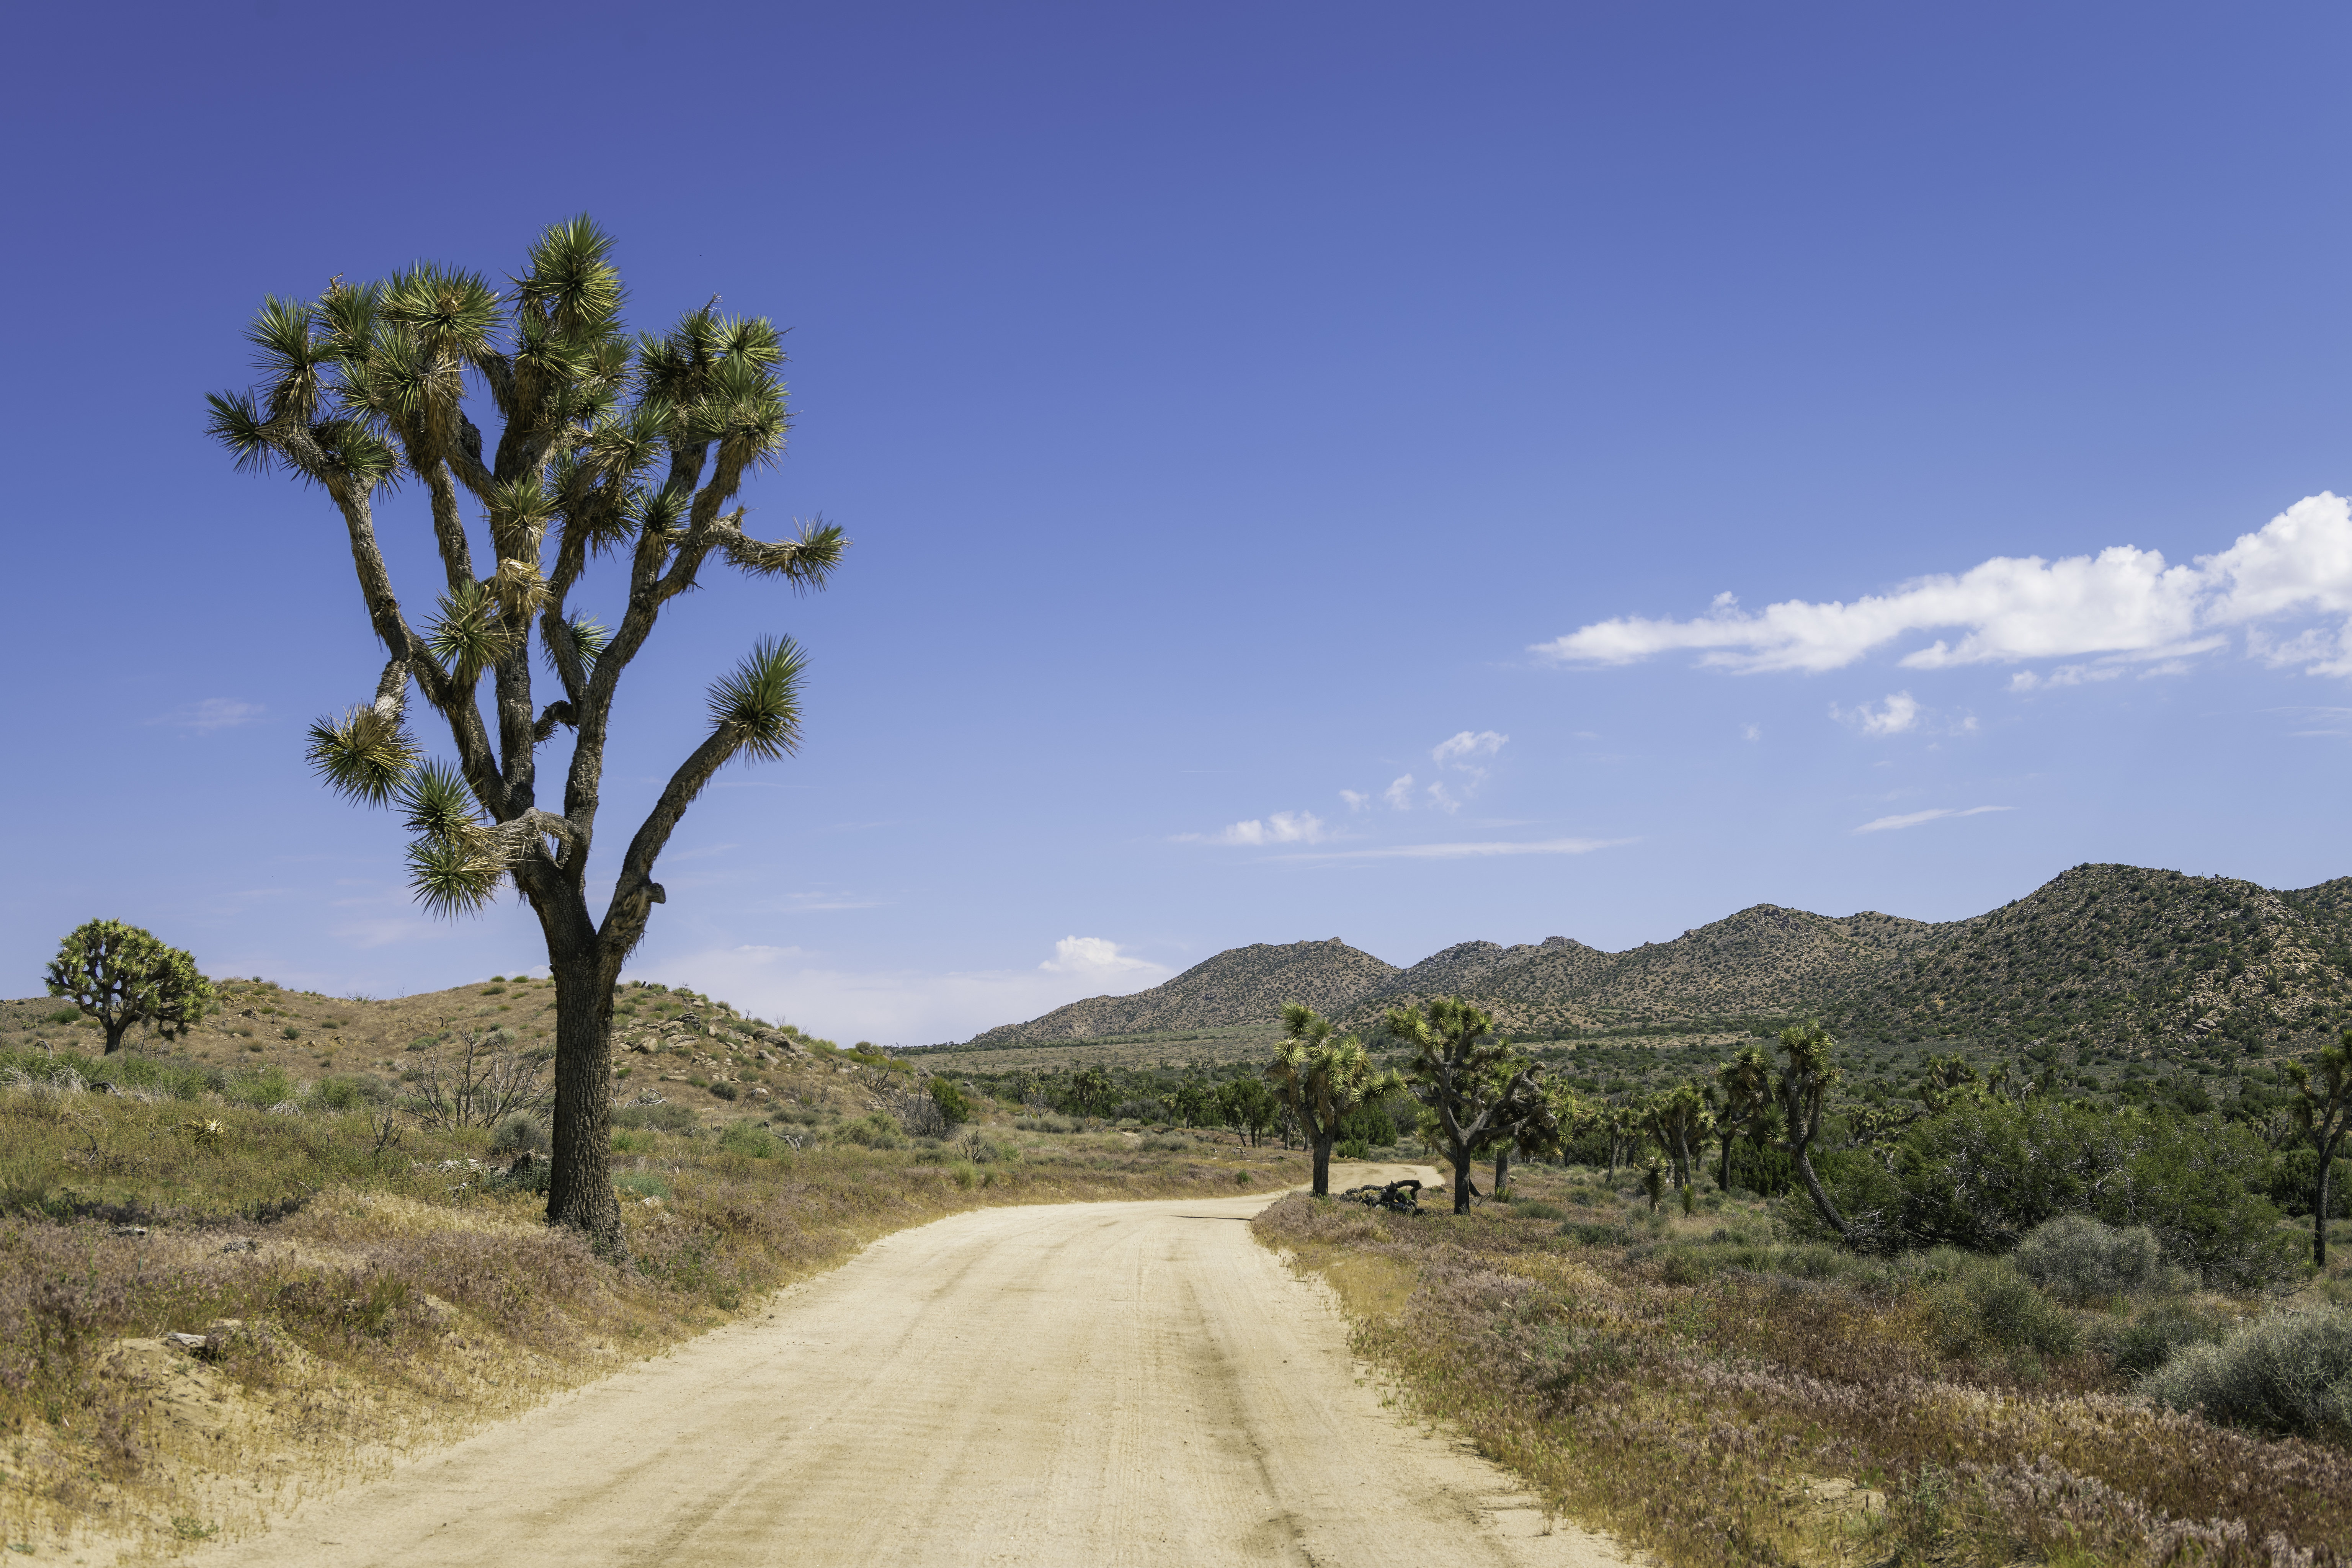 A dirt road disappears into the distance with a lone Joshua tree at the side of the road and vegetation-covered hills in the distance.